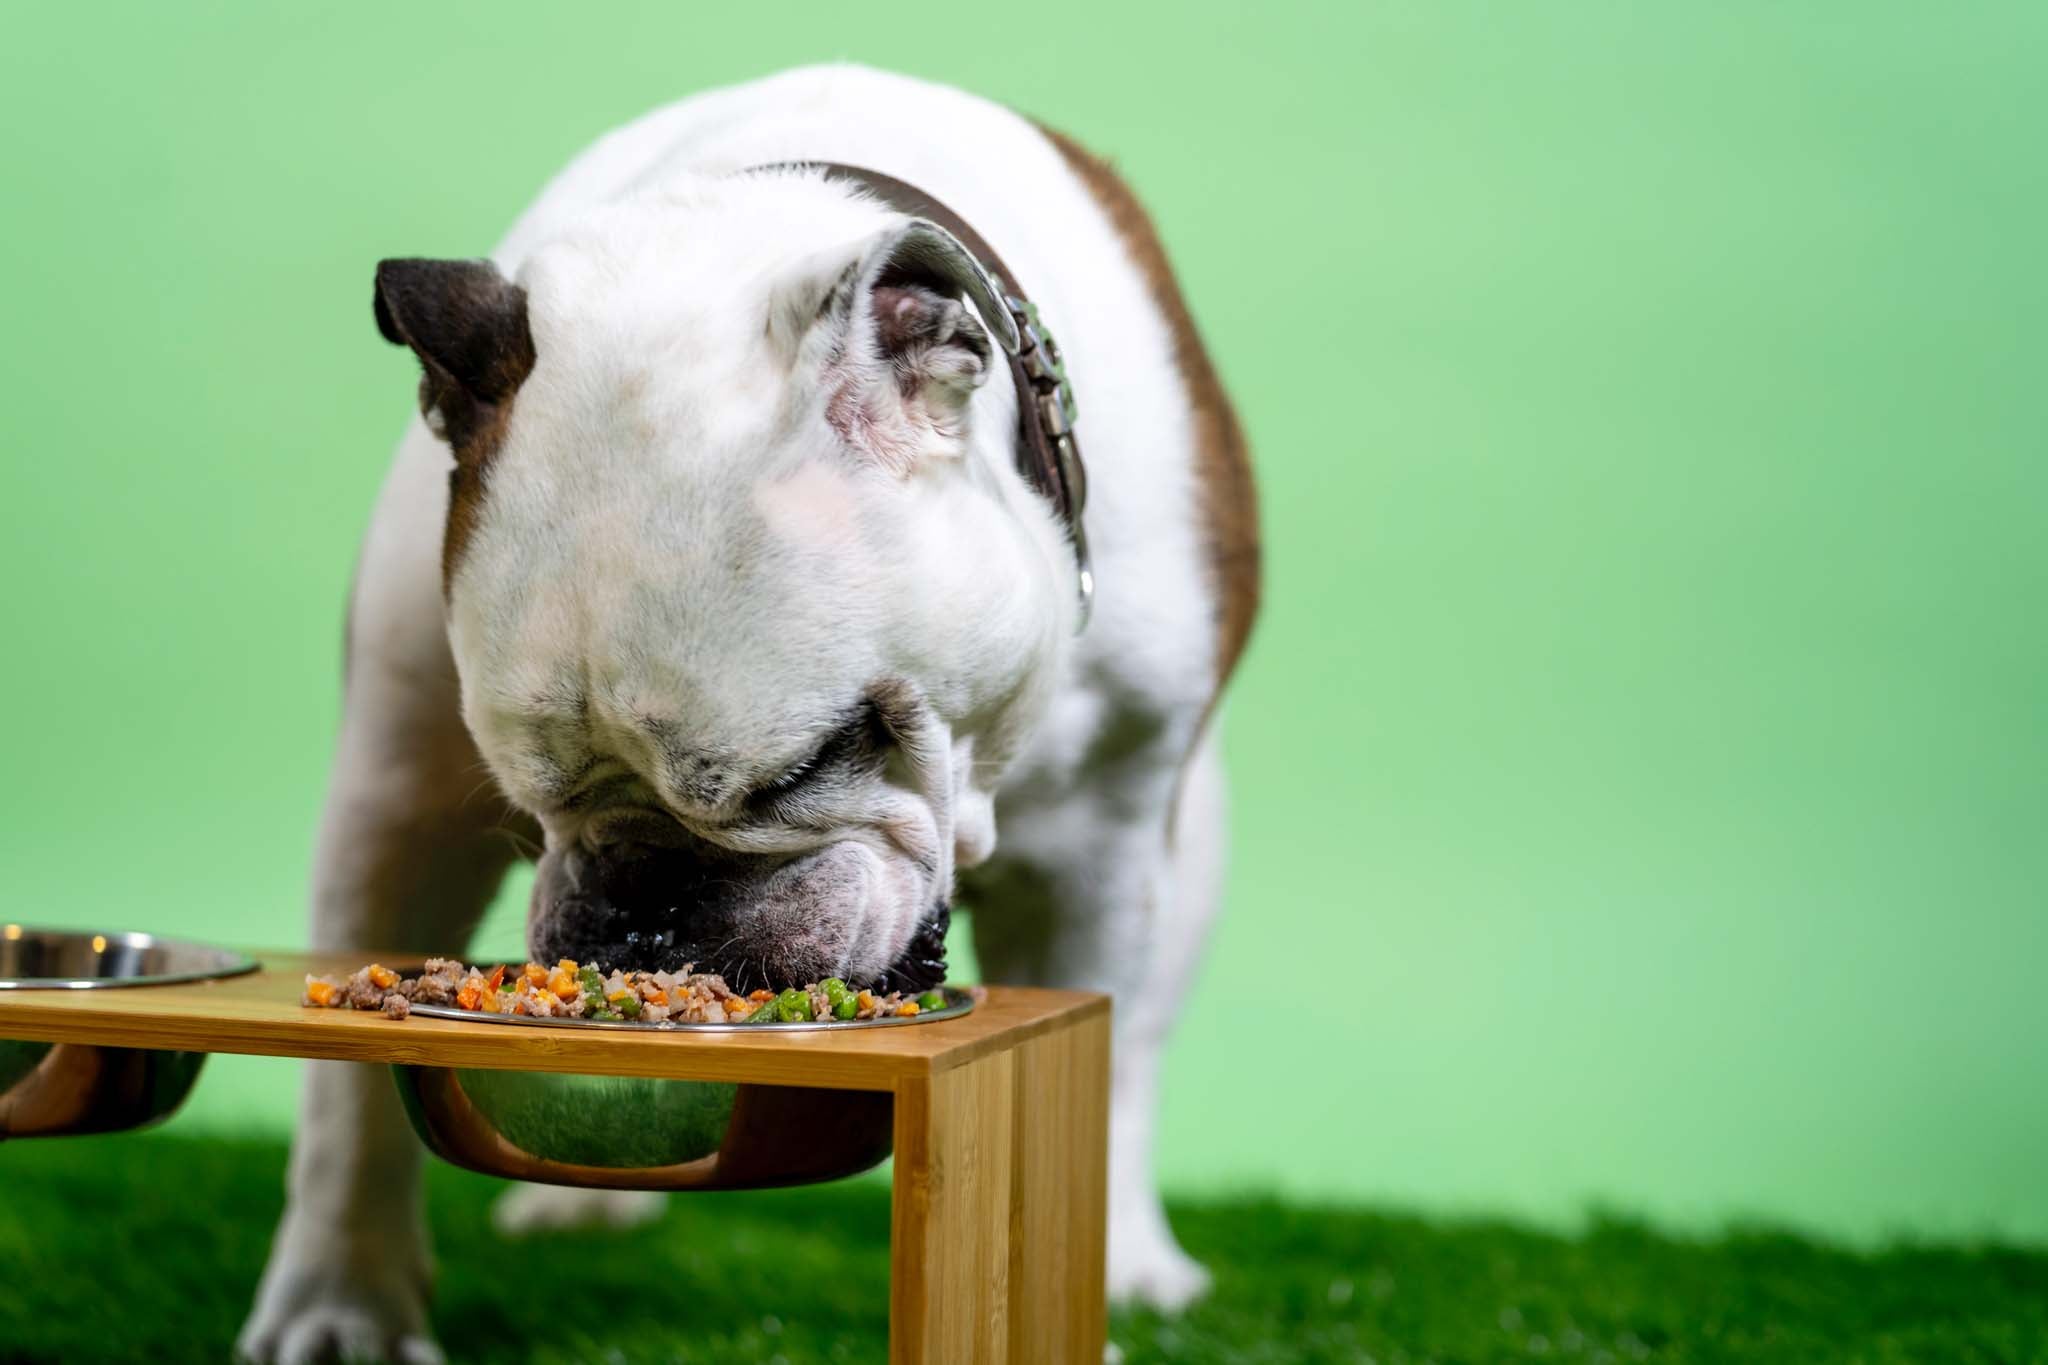 Raw Diet For Dogs: 6 Steps To Get Started